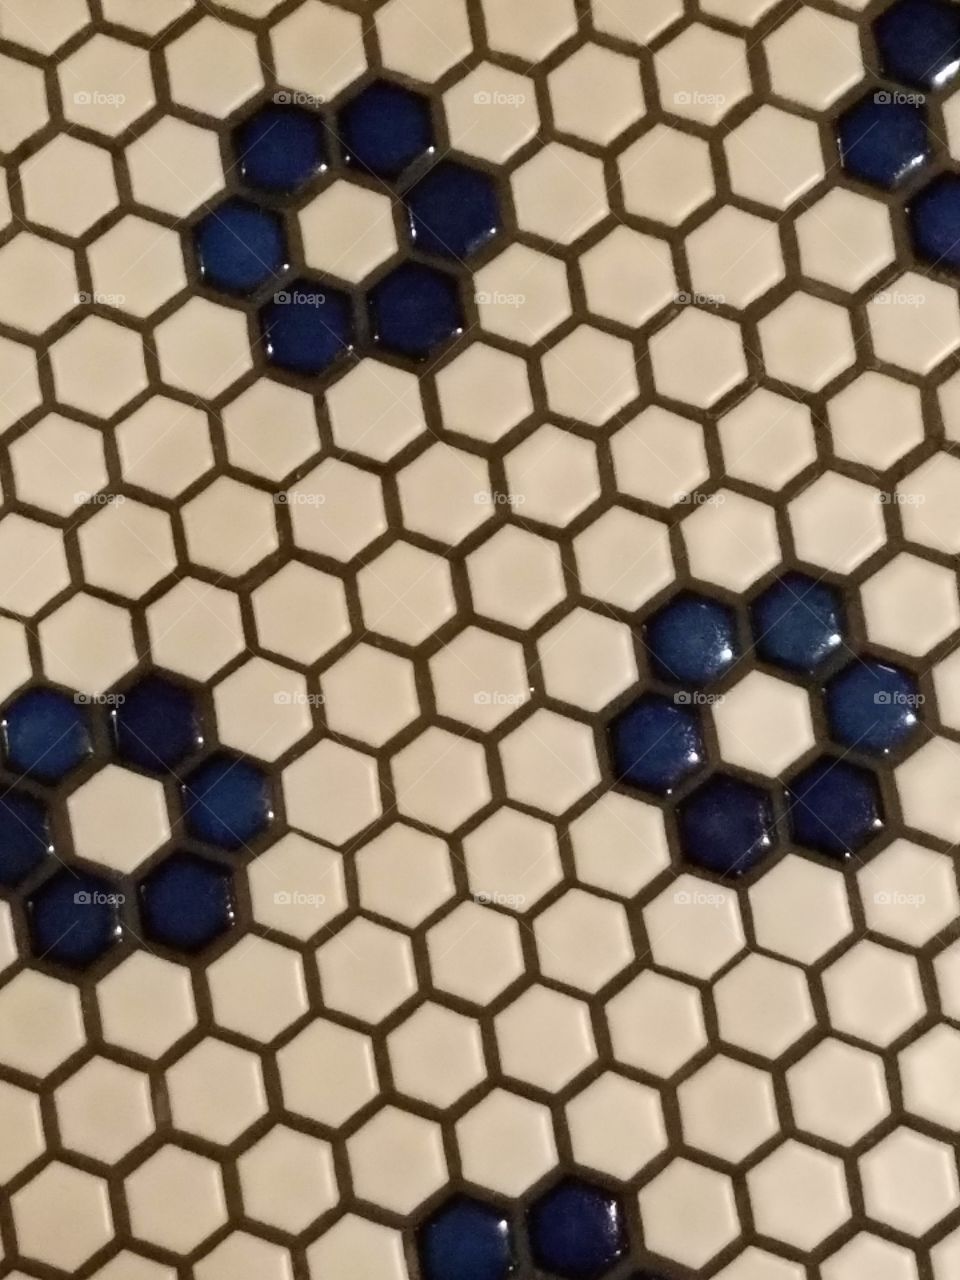 white and blue ceramic hexagon tile with dark grout